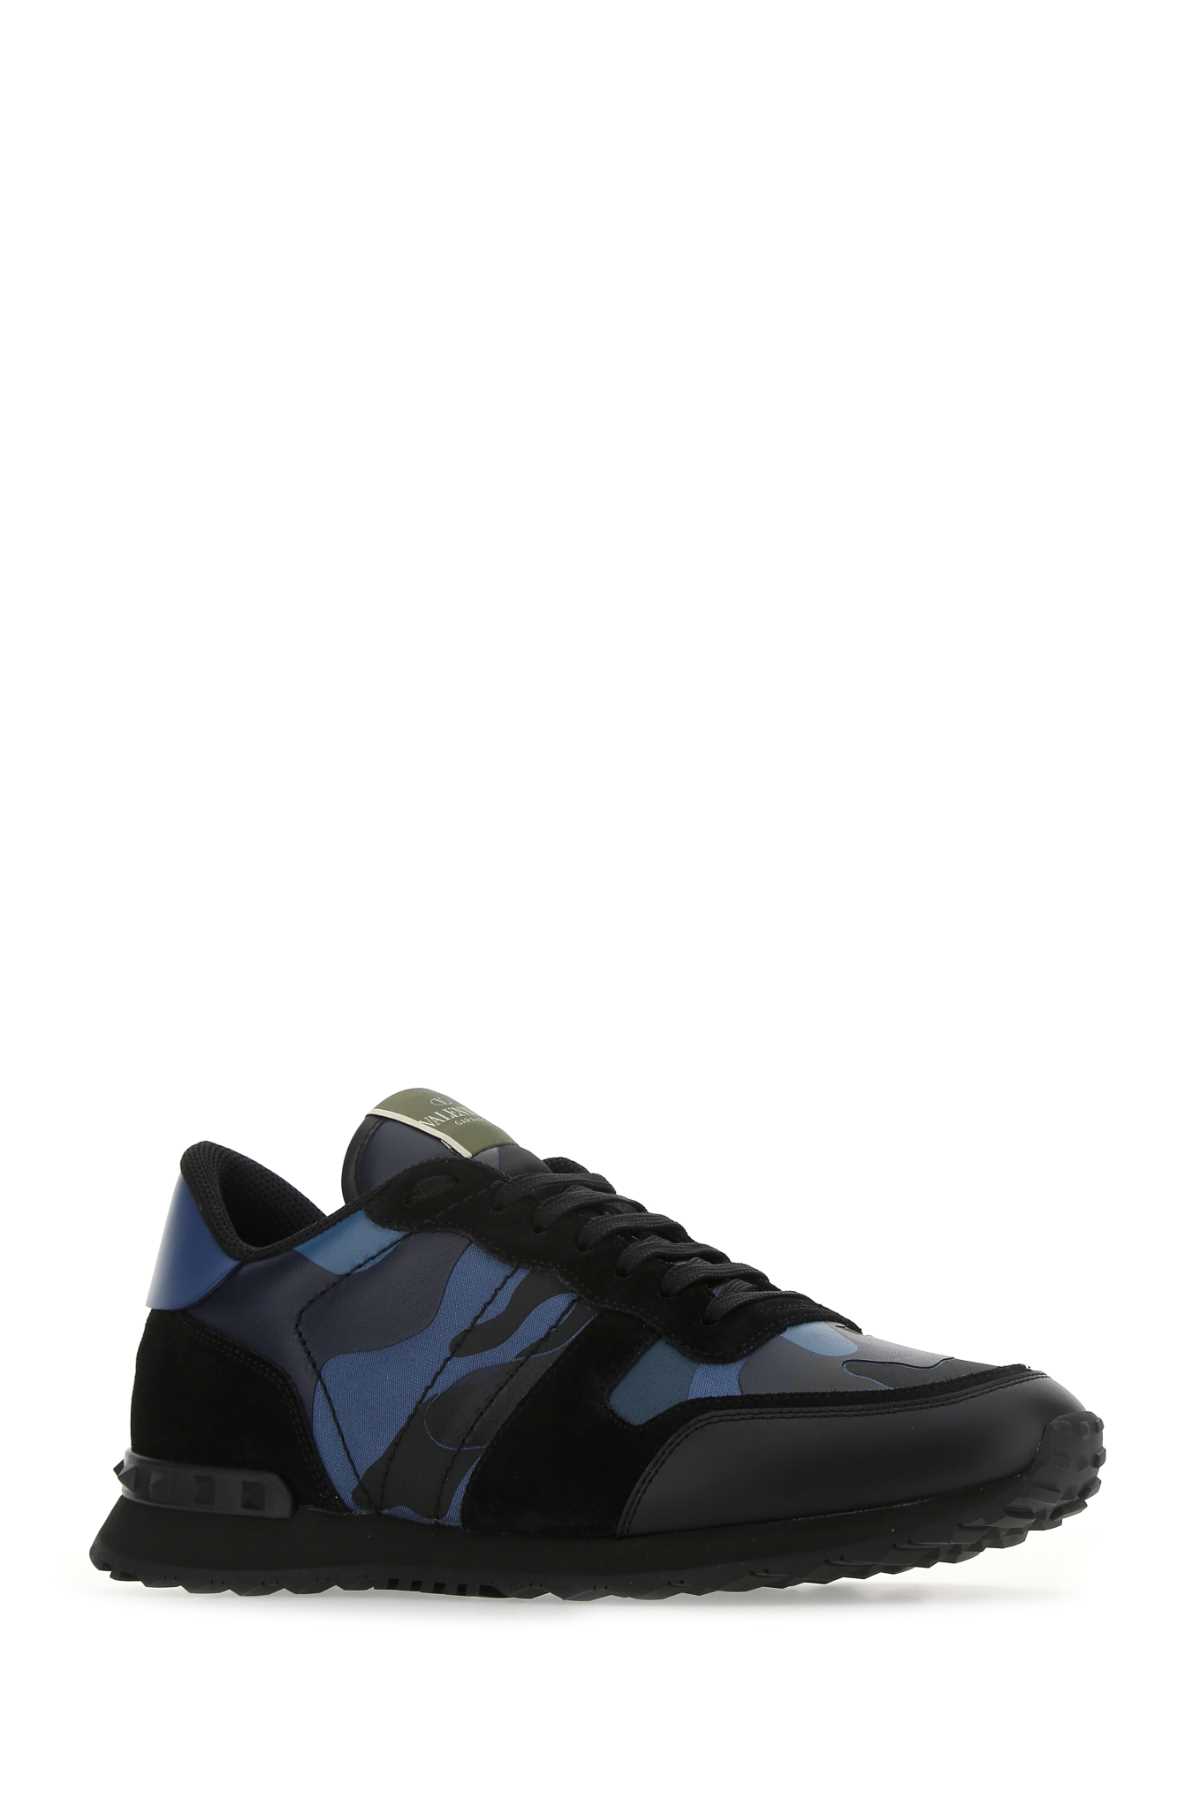 Shop Valentino Multicolor Fabric And Nappa Leather Rockrunner Camouflage Sneakers In Bluettemarineneroneronewbaltiquene